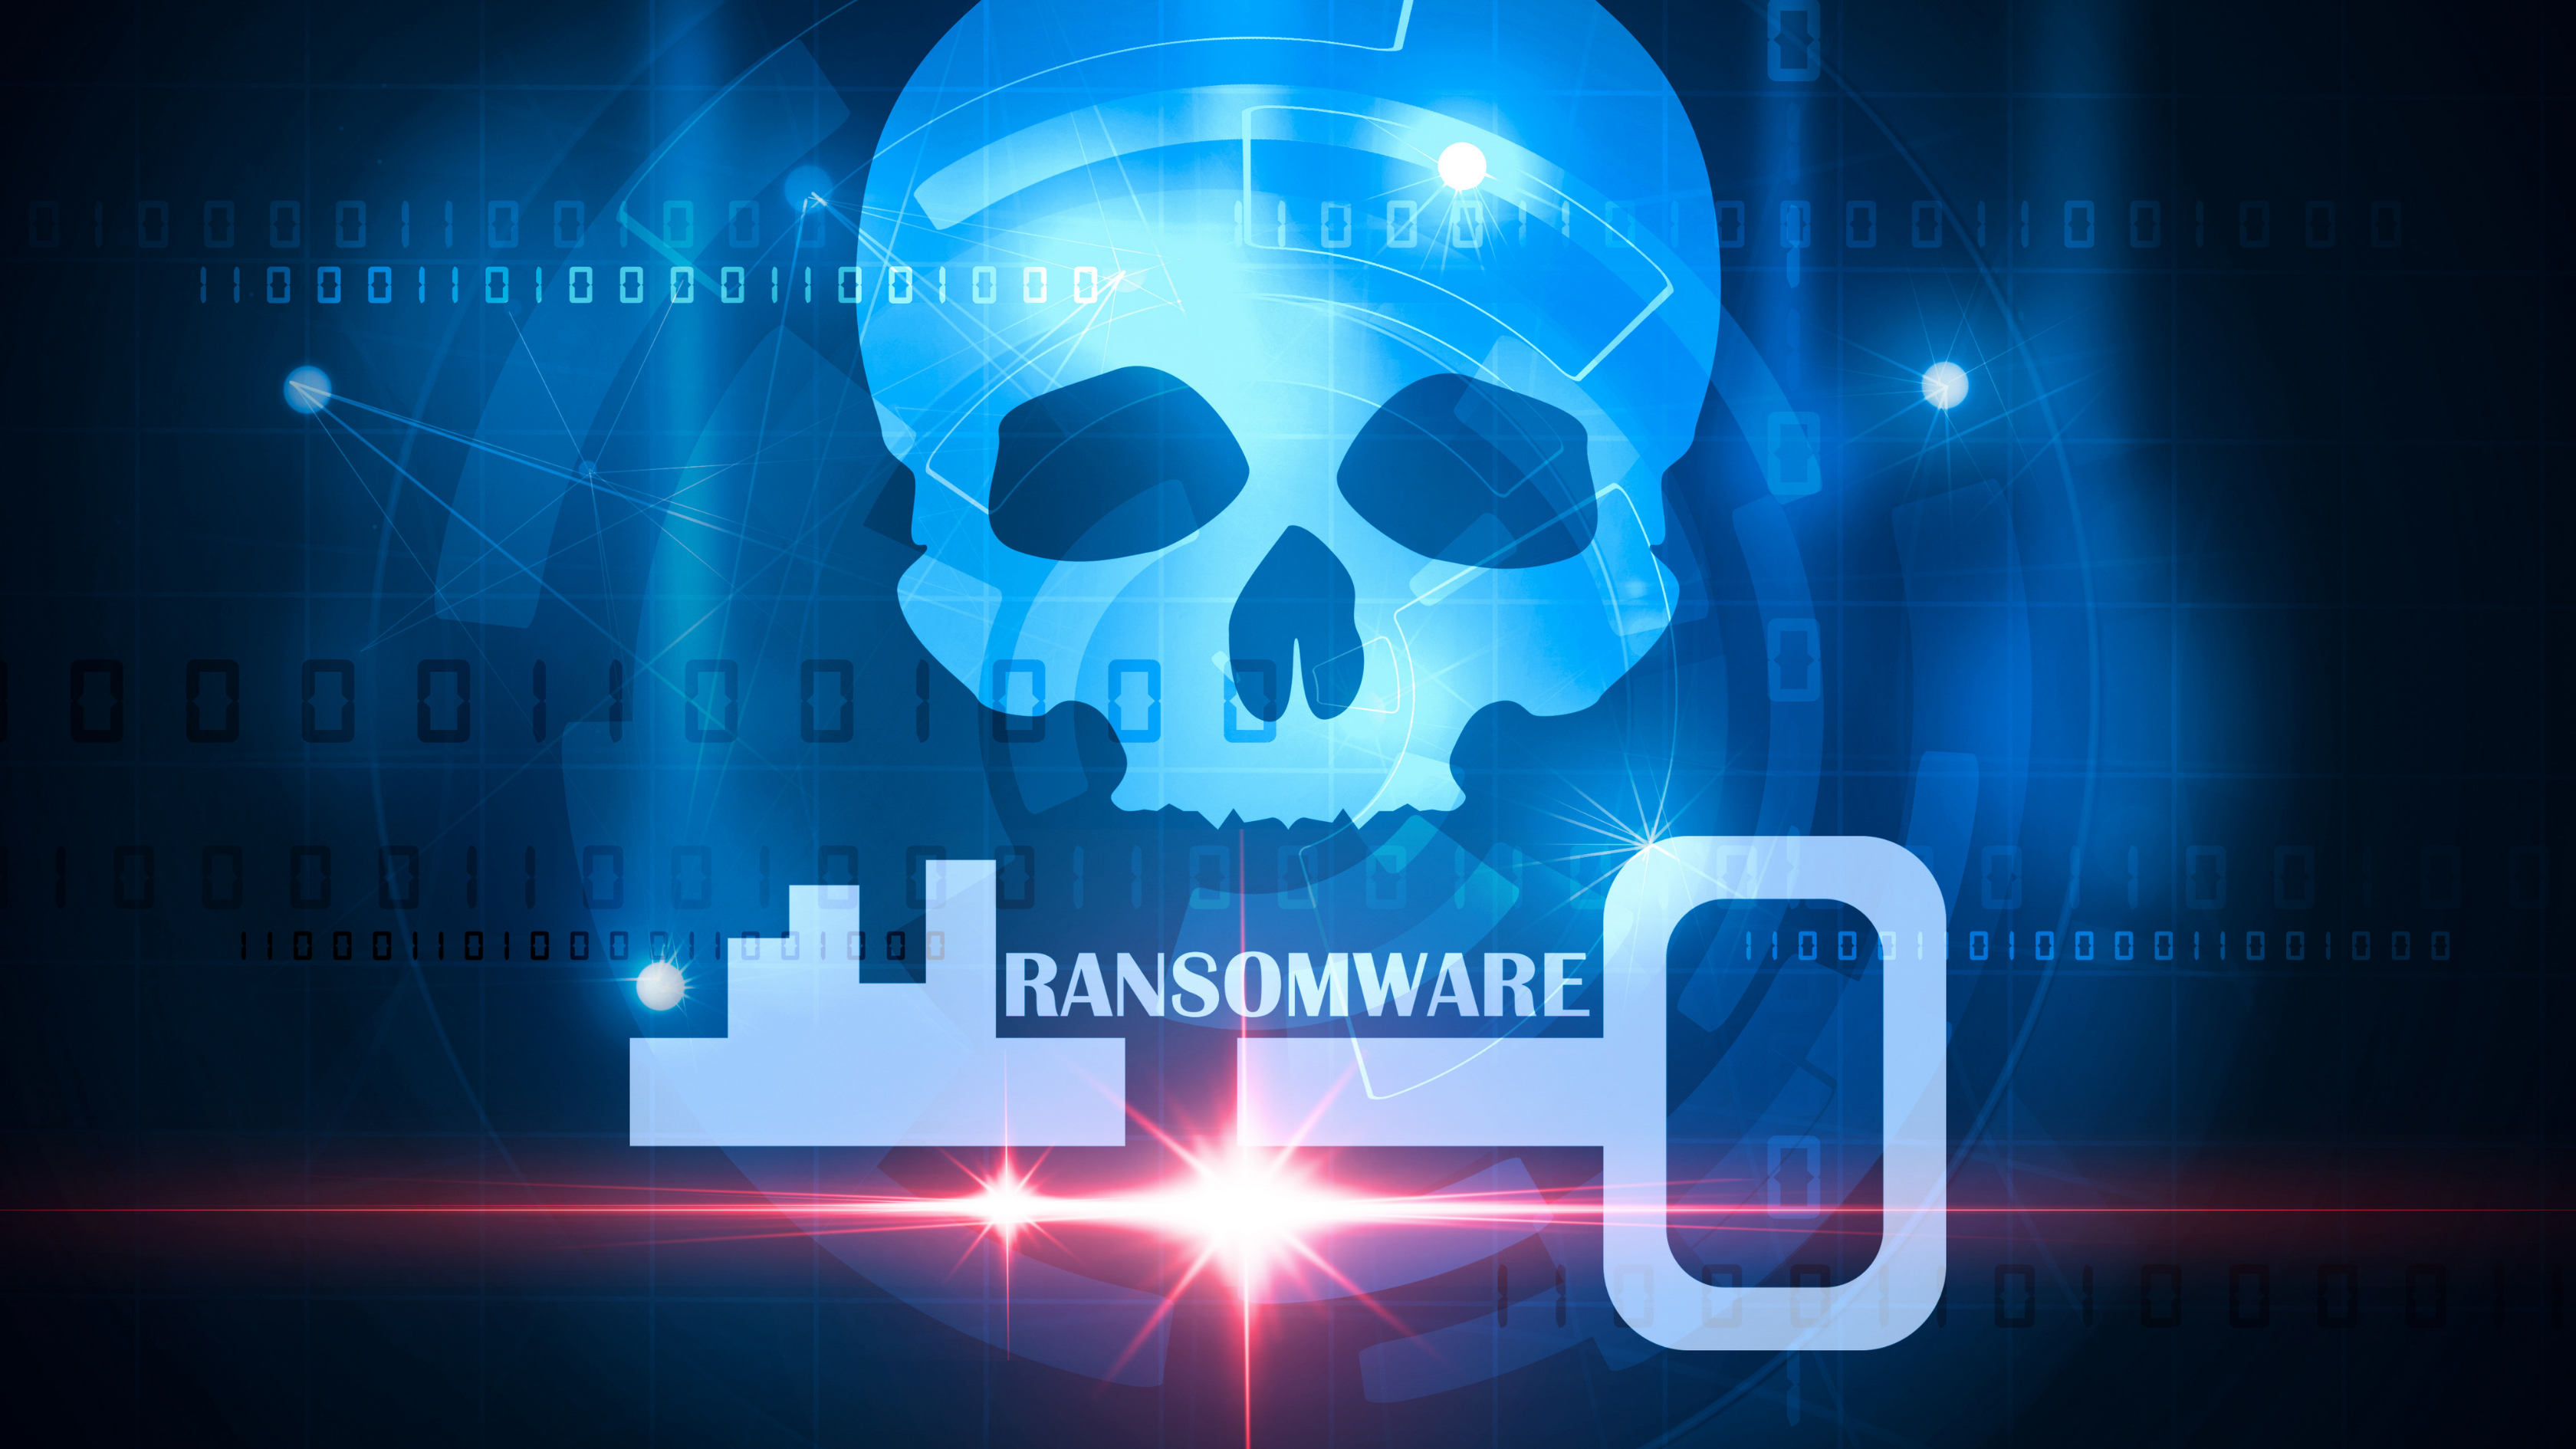 Ransomware attacks are on the rise